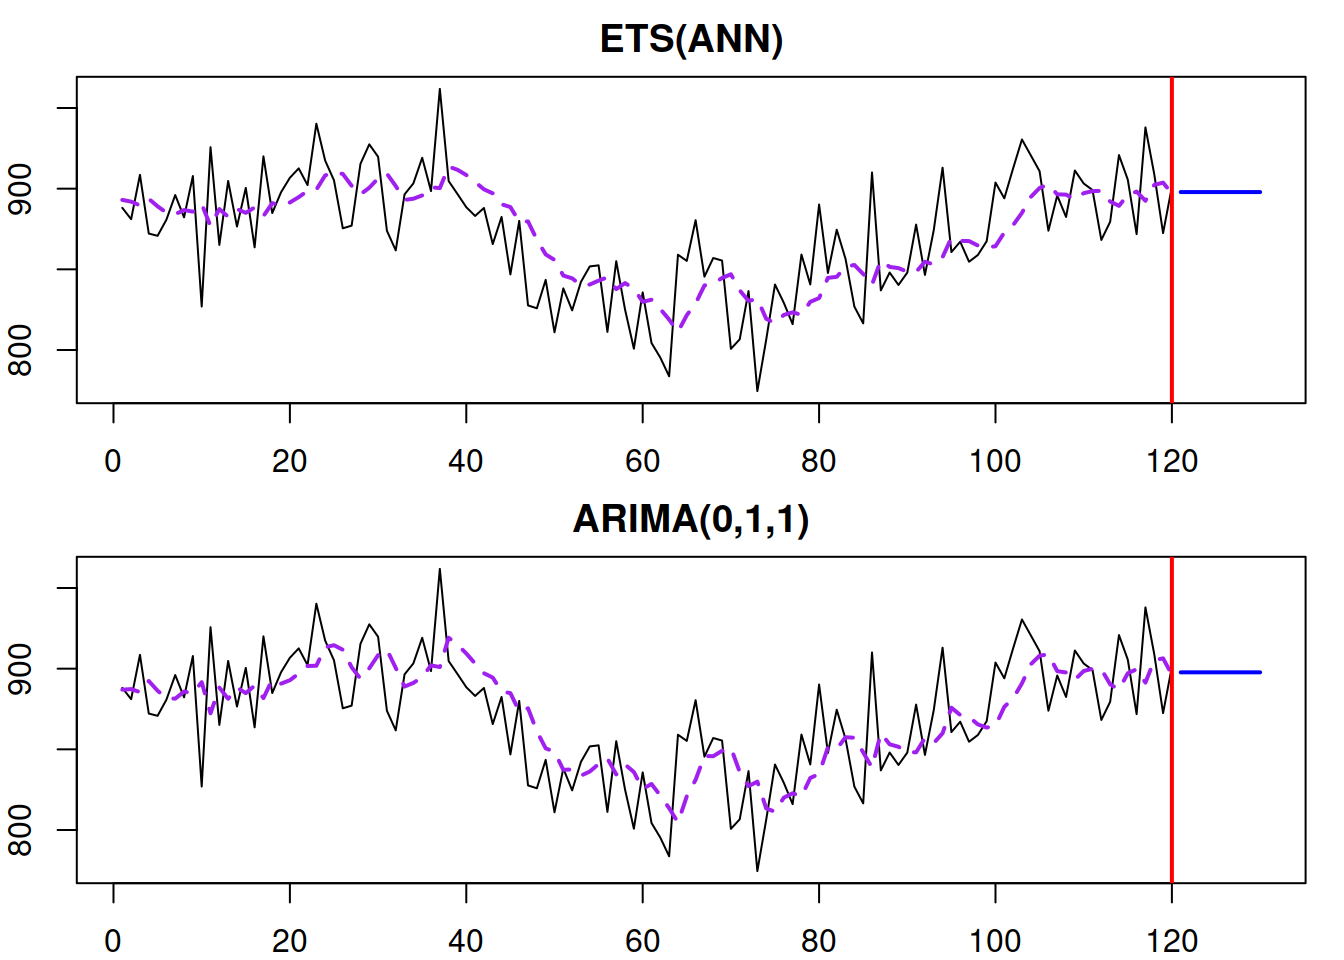 ETS(A,N,N) and ARIMA(0,1,1) models producing the same fit and forecast trajectories.